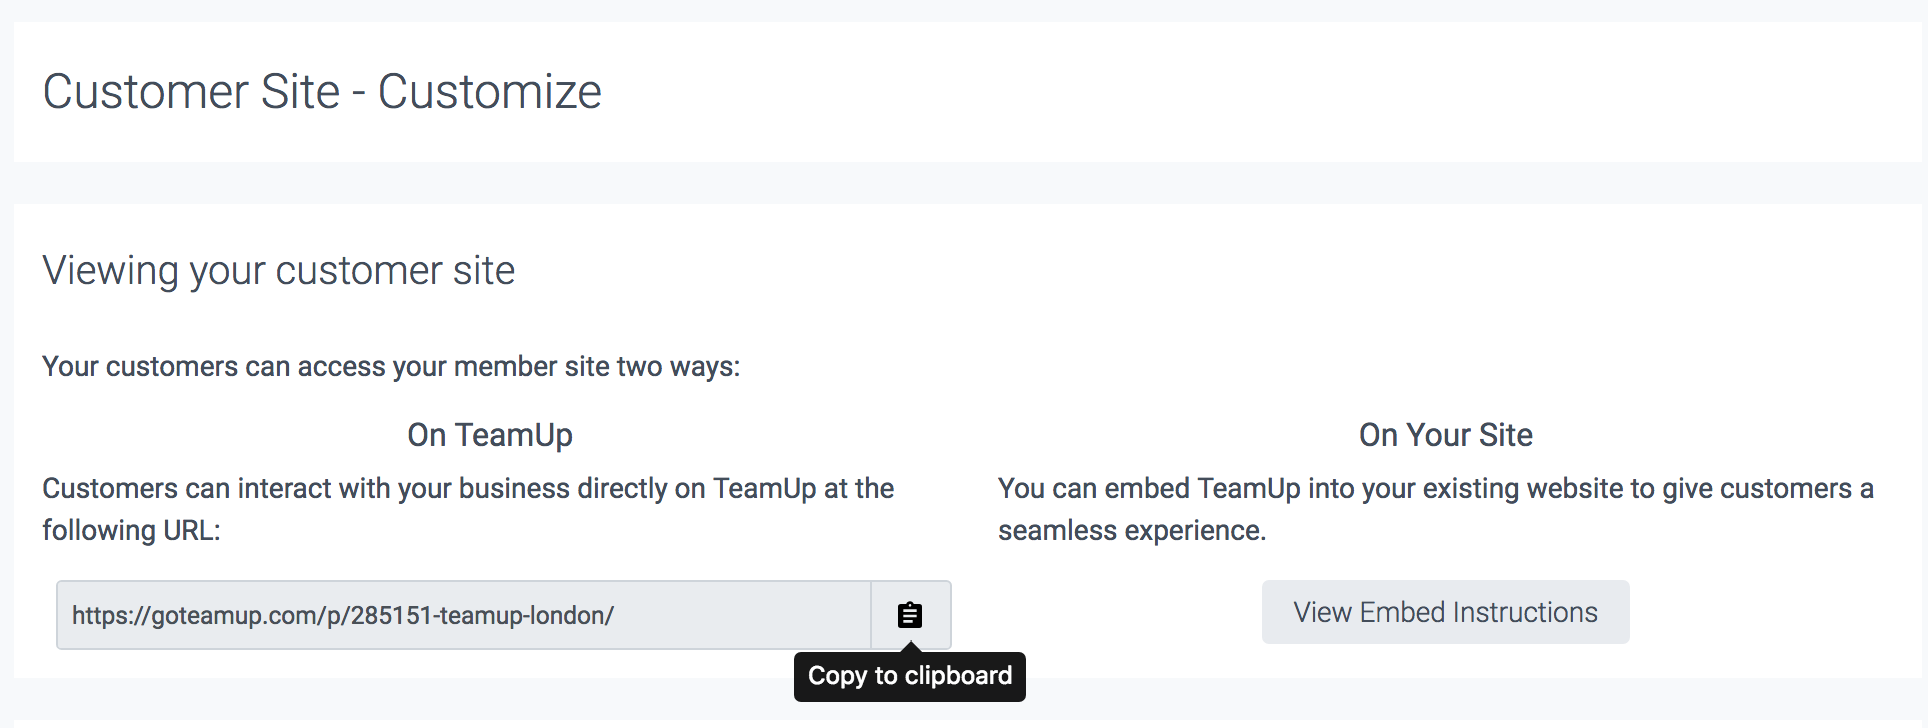 Image of the Customer Site section of TeamUp, including how to copy the link. 